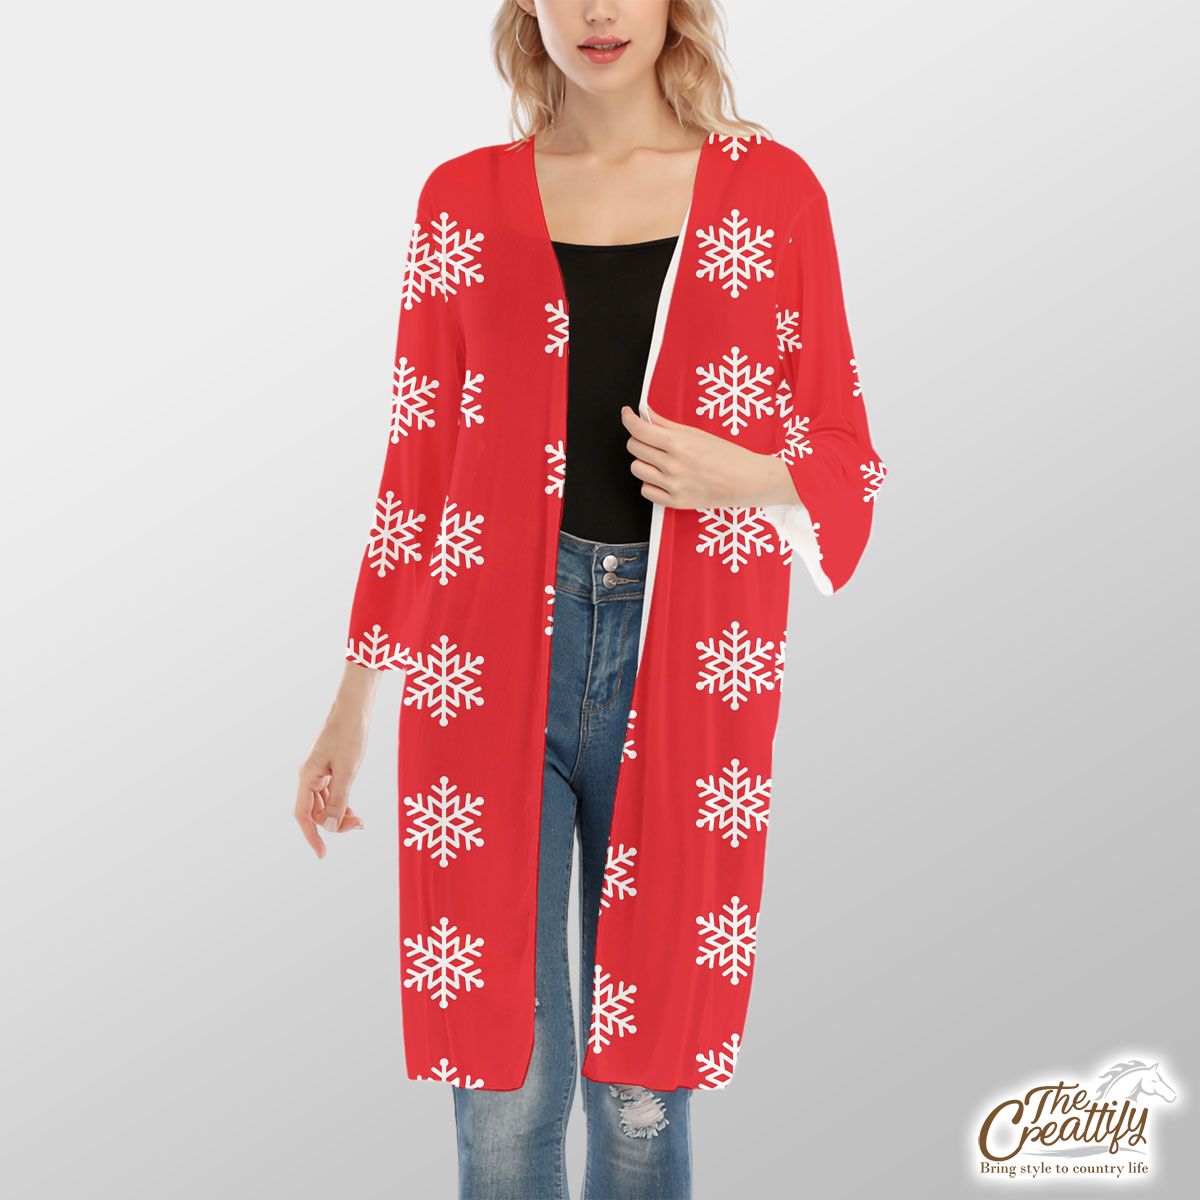 Snowflake Pattern, Christmas Snowflakes, Christmas Present Ideas With Red V-Neck Mesh Cardigan